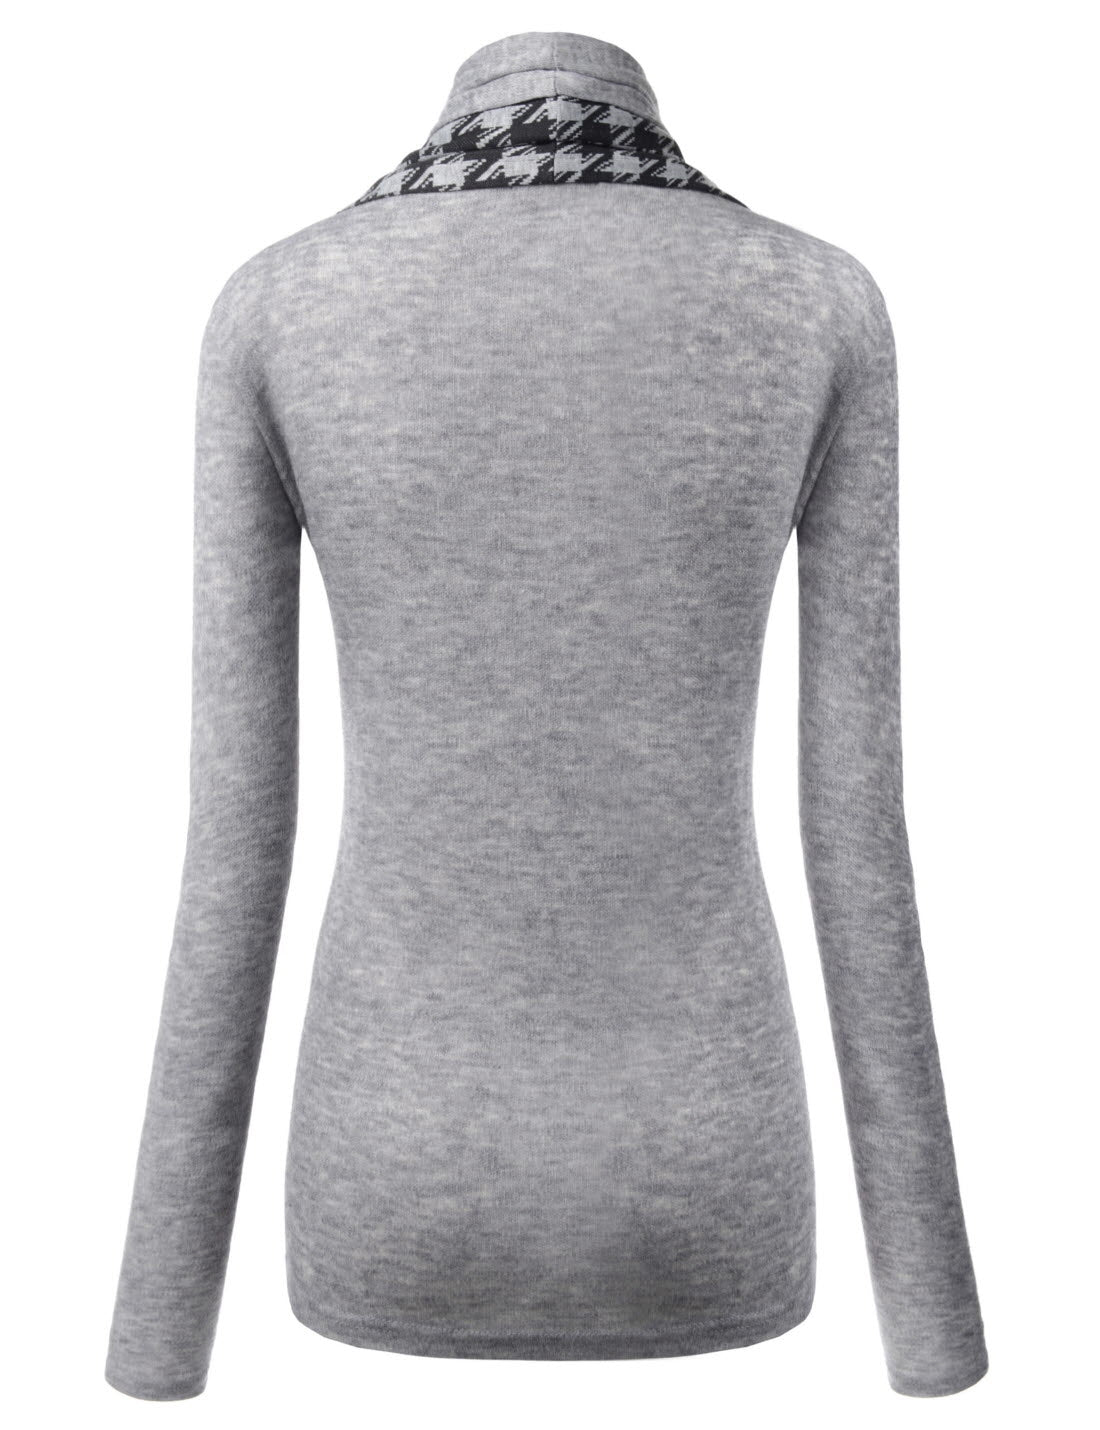 Heather Gray Houndstooth Shawl Collar Knitted Open Cardigans